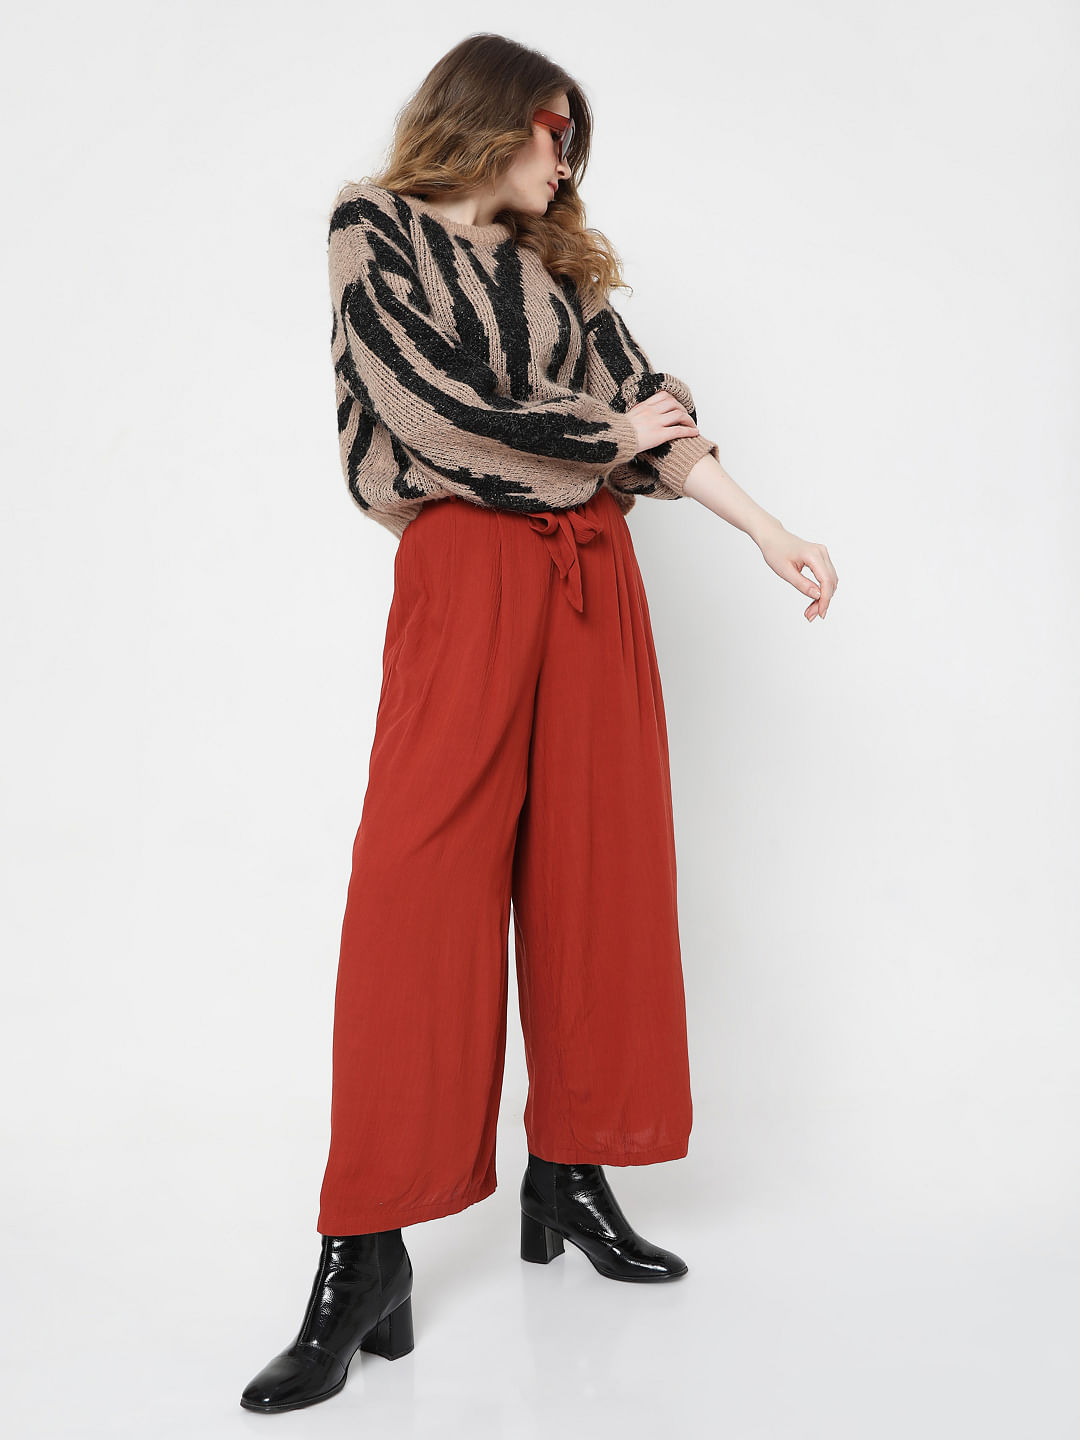 Bold Pants for Winter  Thrifts and Threads